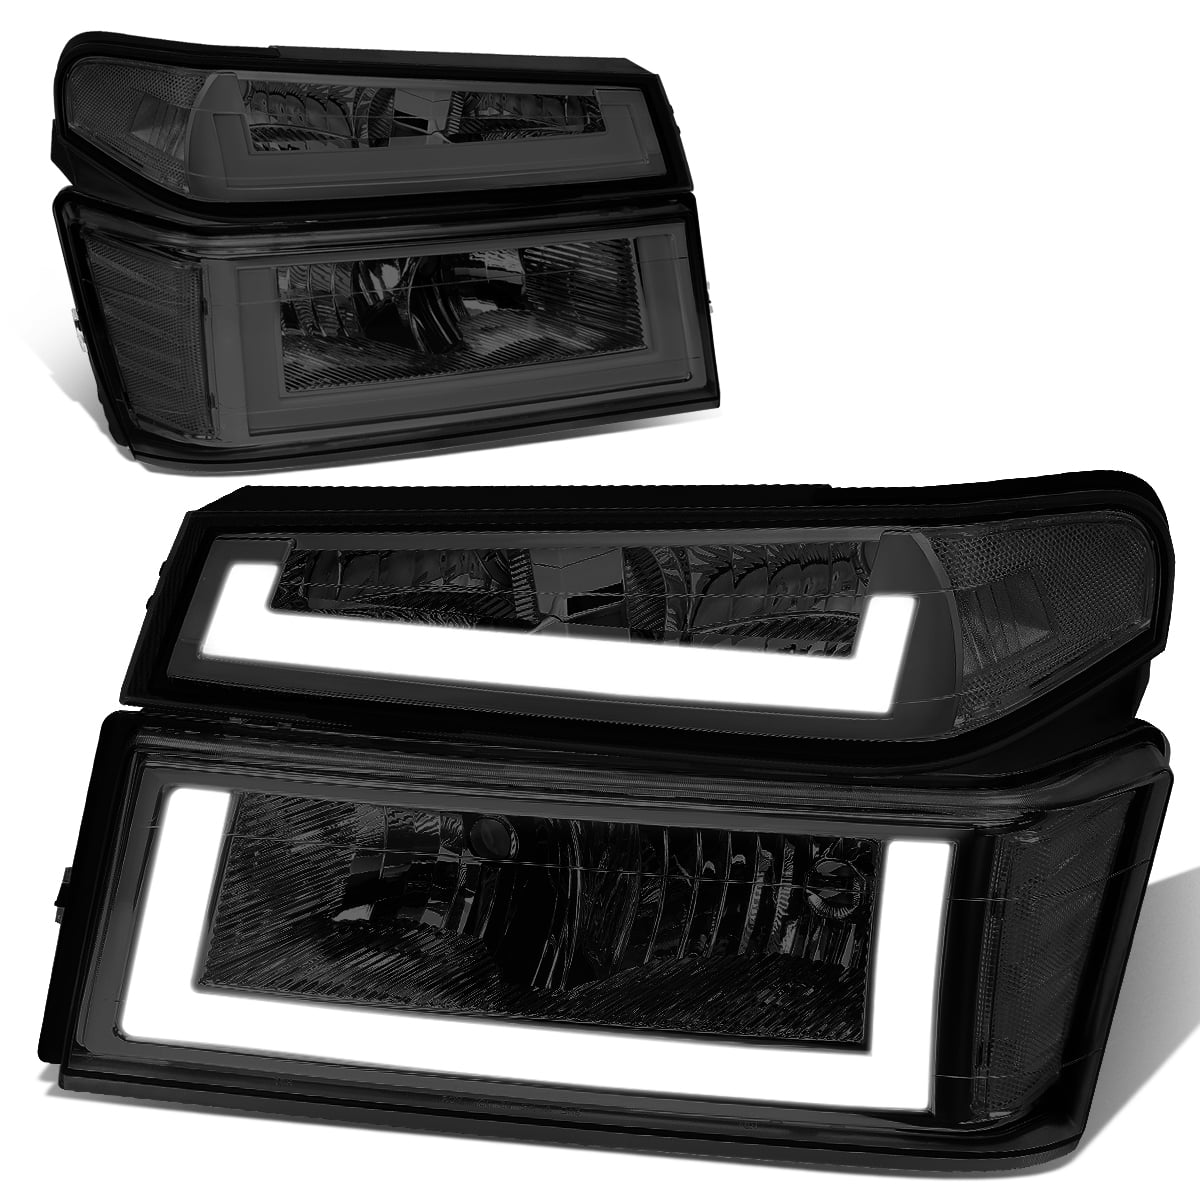 Details about   FOR 2004-2012 CHEVY COLORADO/GMC CANYON REPLACEMENT HEADLIGHT W/BLUE LED DRL SET